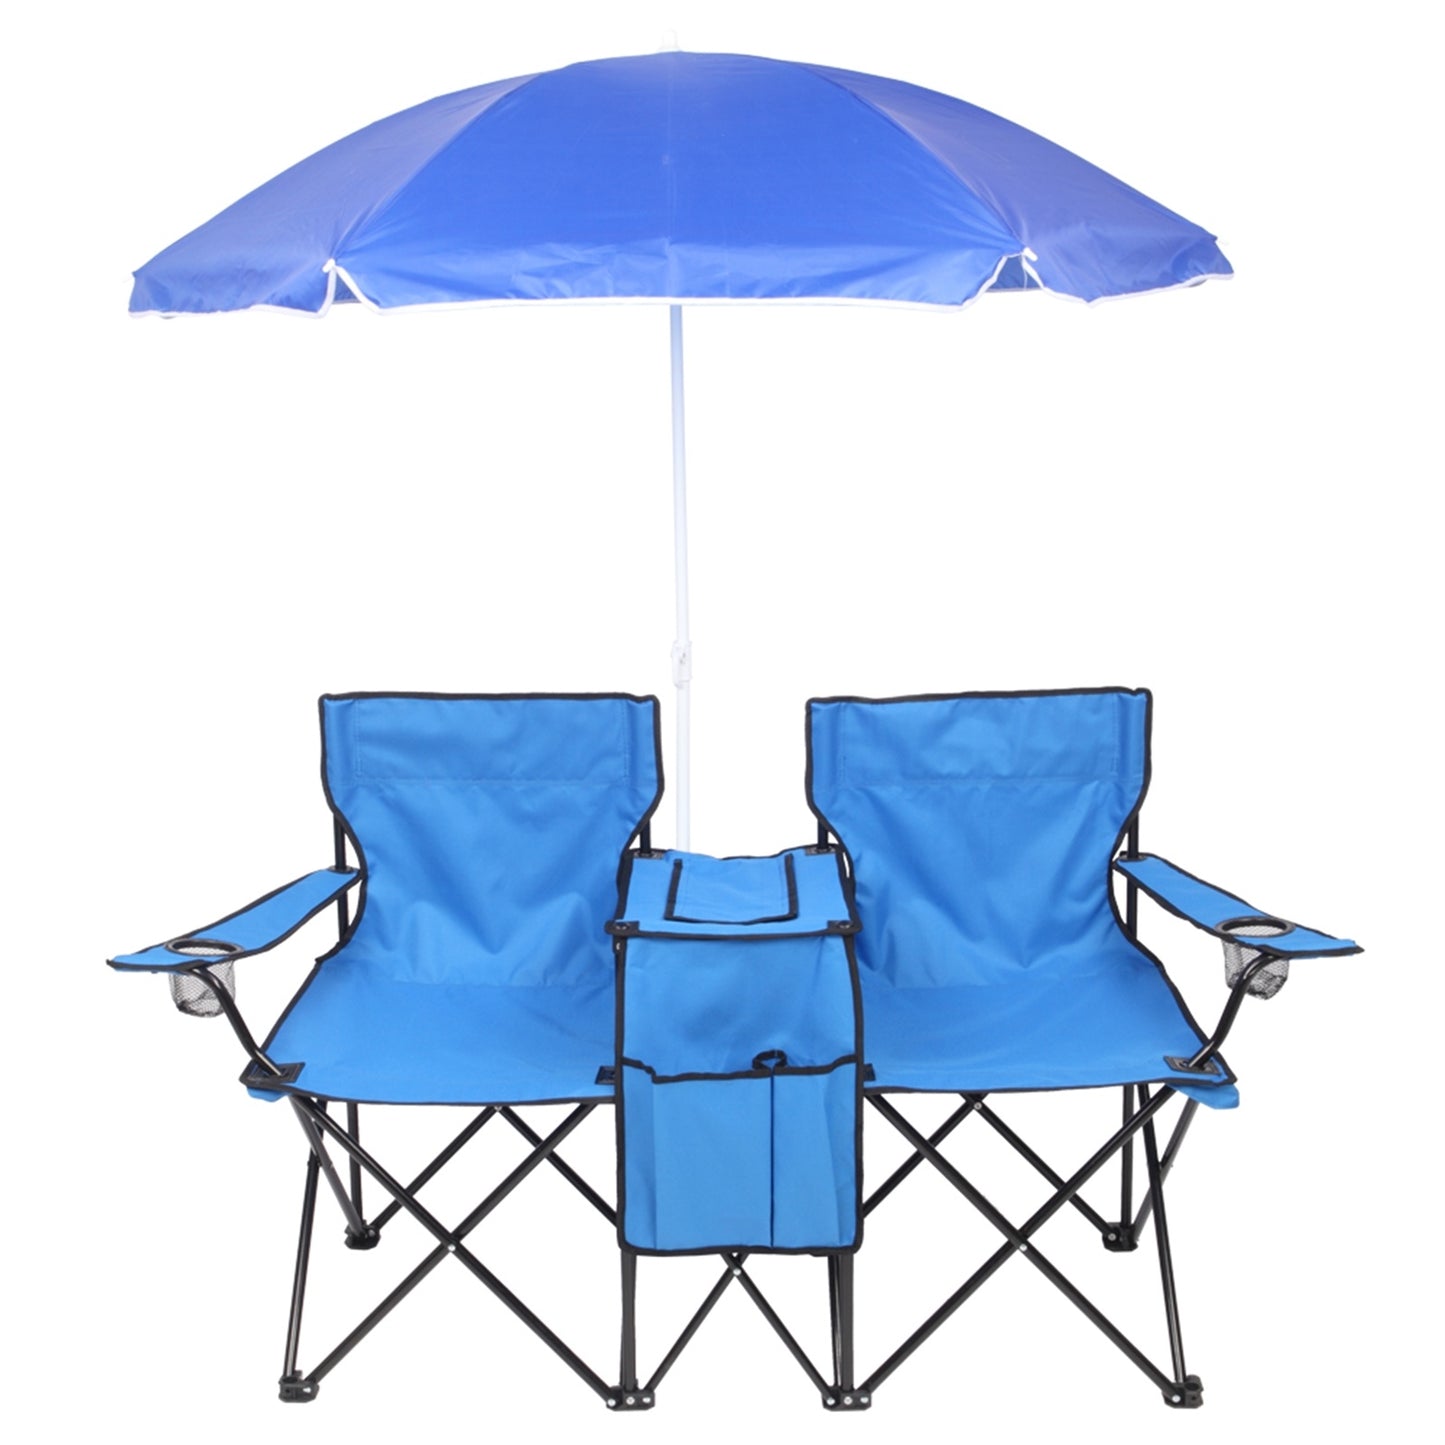 Double Folding Picnic Chairs w/Umbrella Mini Table Beverage Holder Carrying Bag